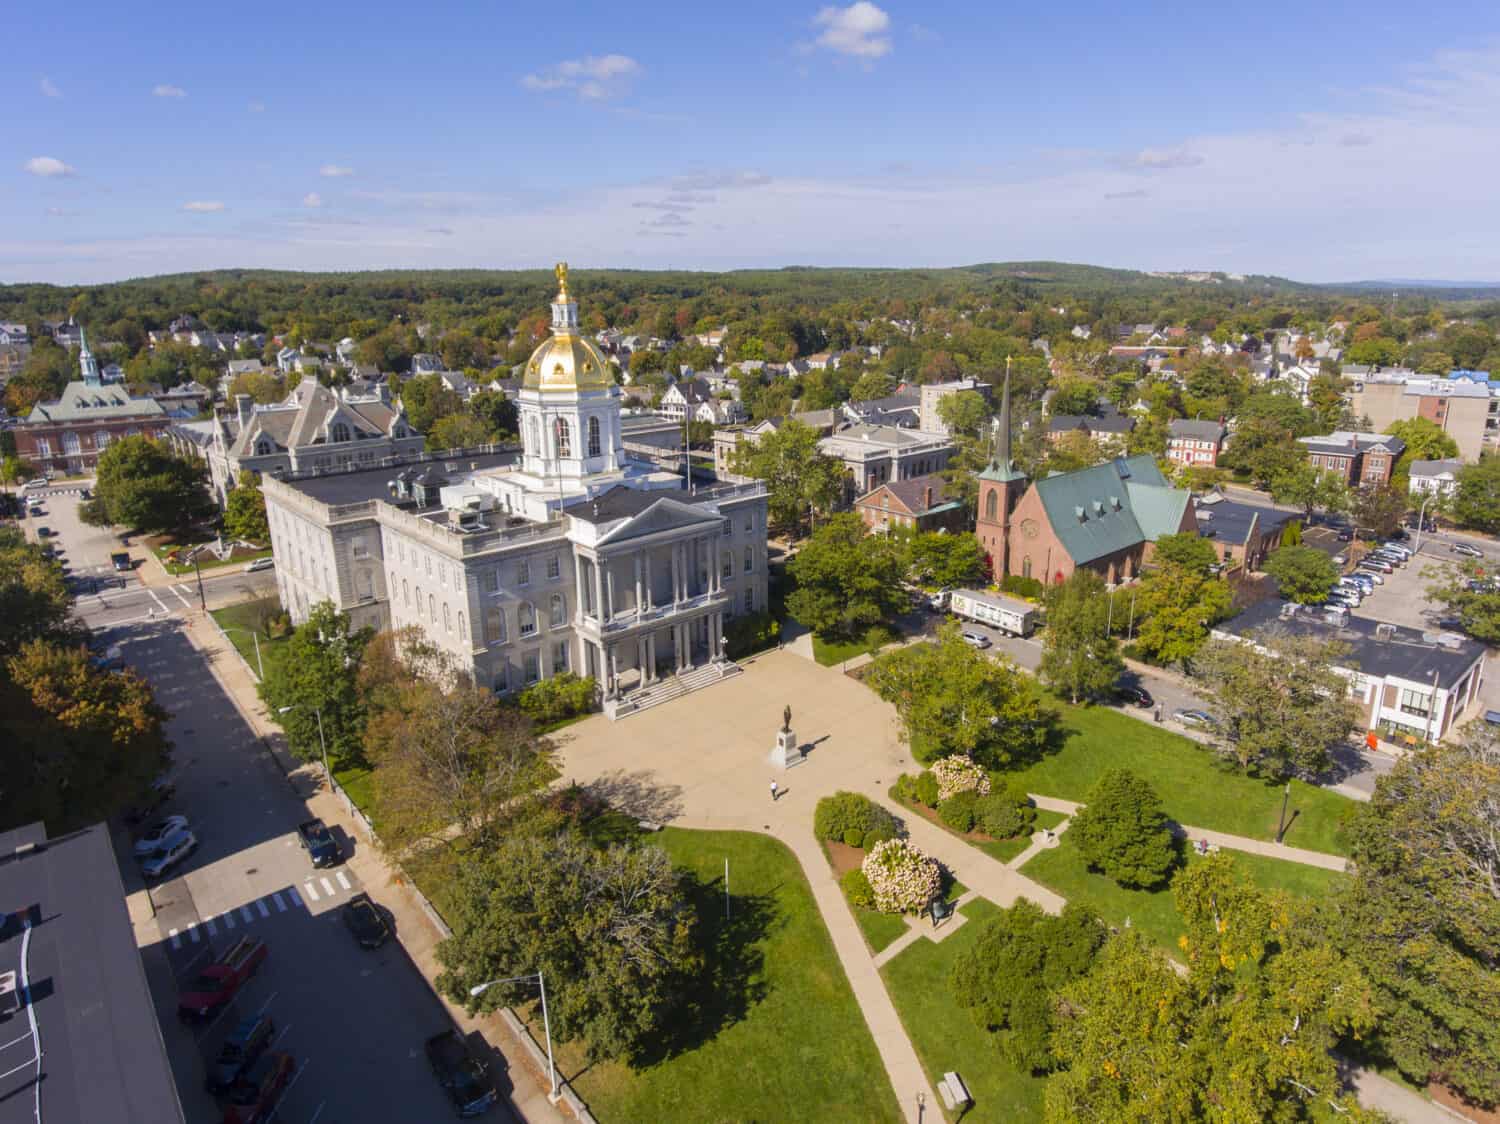 New Hampshire State House aerial view, Concord, New Hampshire NH, USA. New Hampshire State House is the nations oldest state house, built in 1816 - 1819.